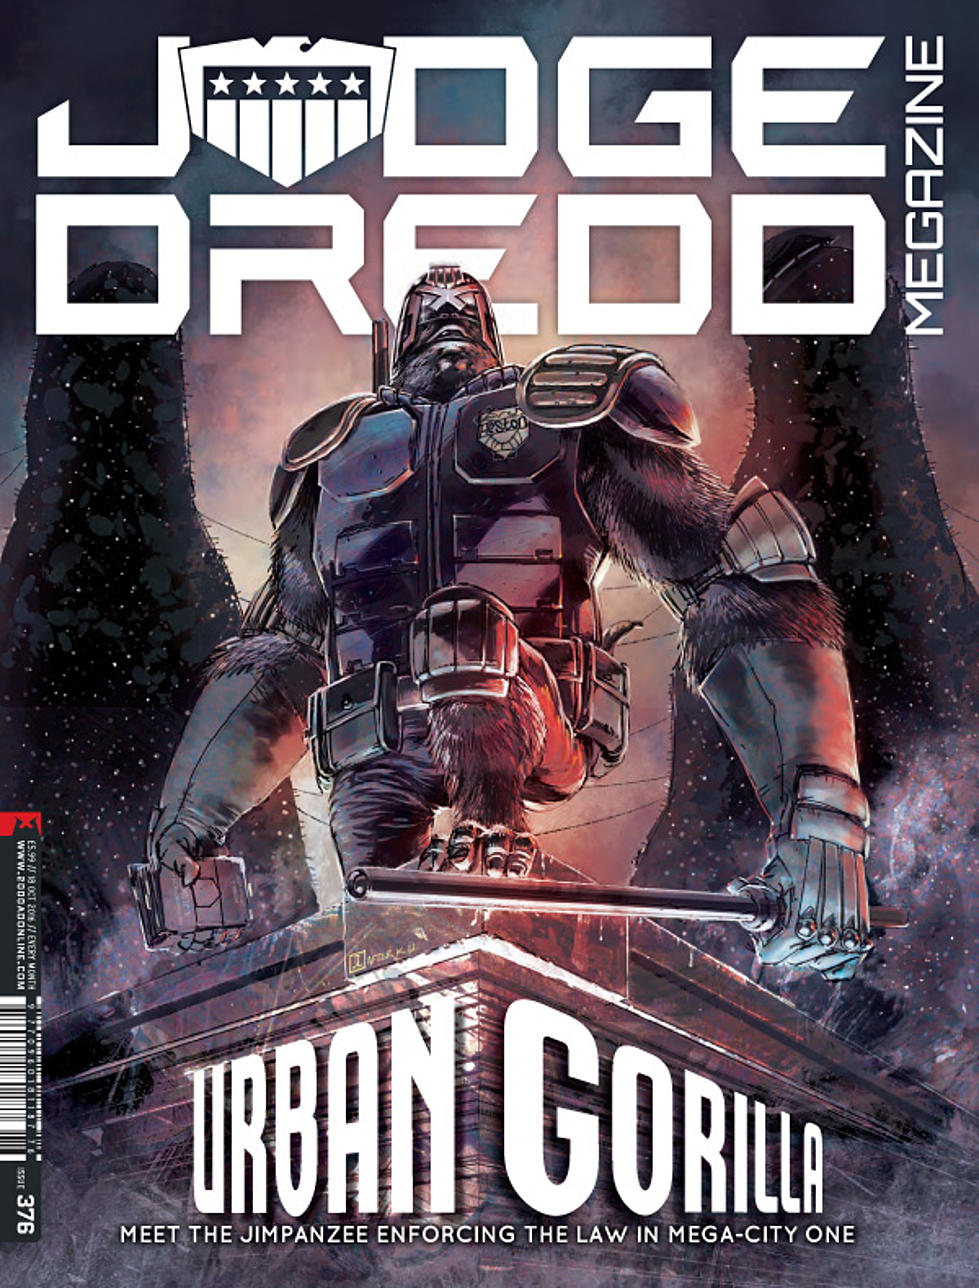 2000 AD Immortalizes Harry Heston, Gorilla Judge, After Creator&#8217;s Untimely Death